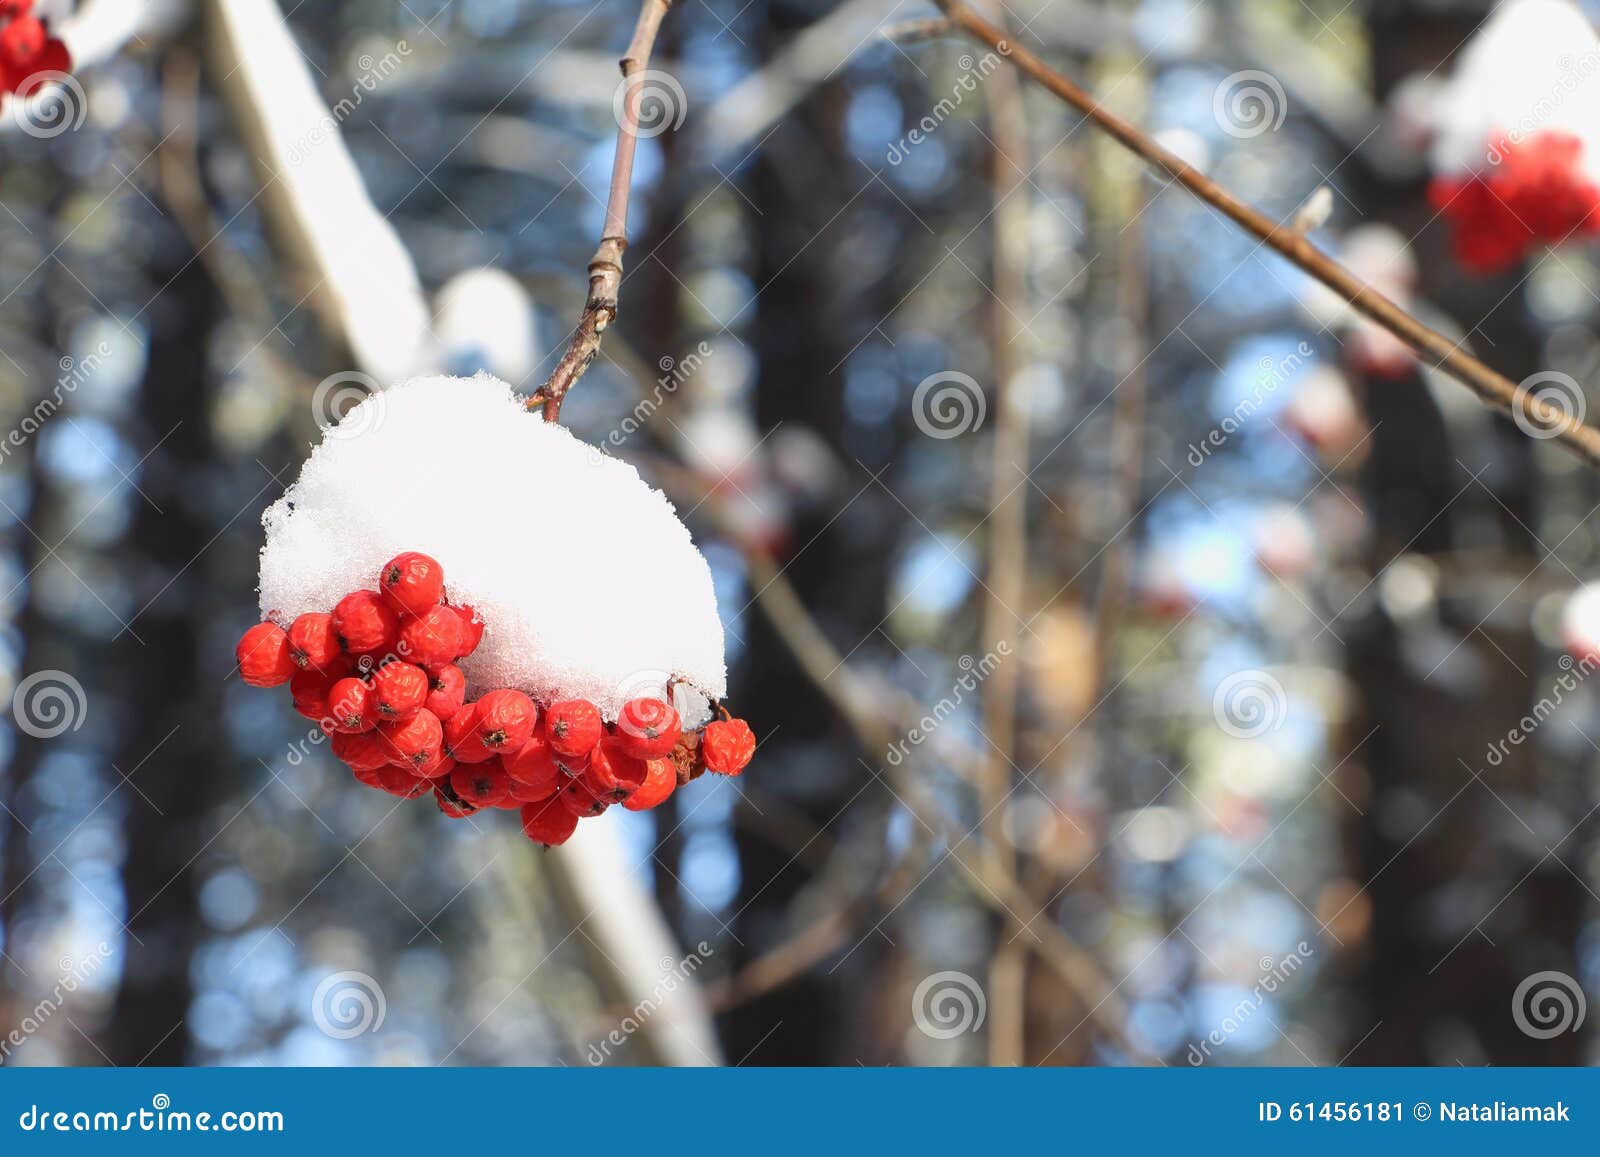 Mountain Ash Berries in Snow on a Branch of a Tree Stock Image - Image ...